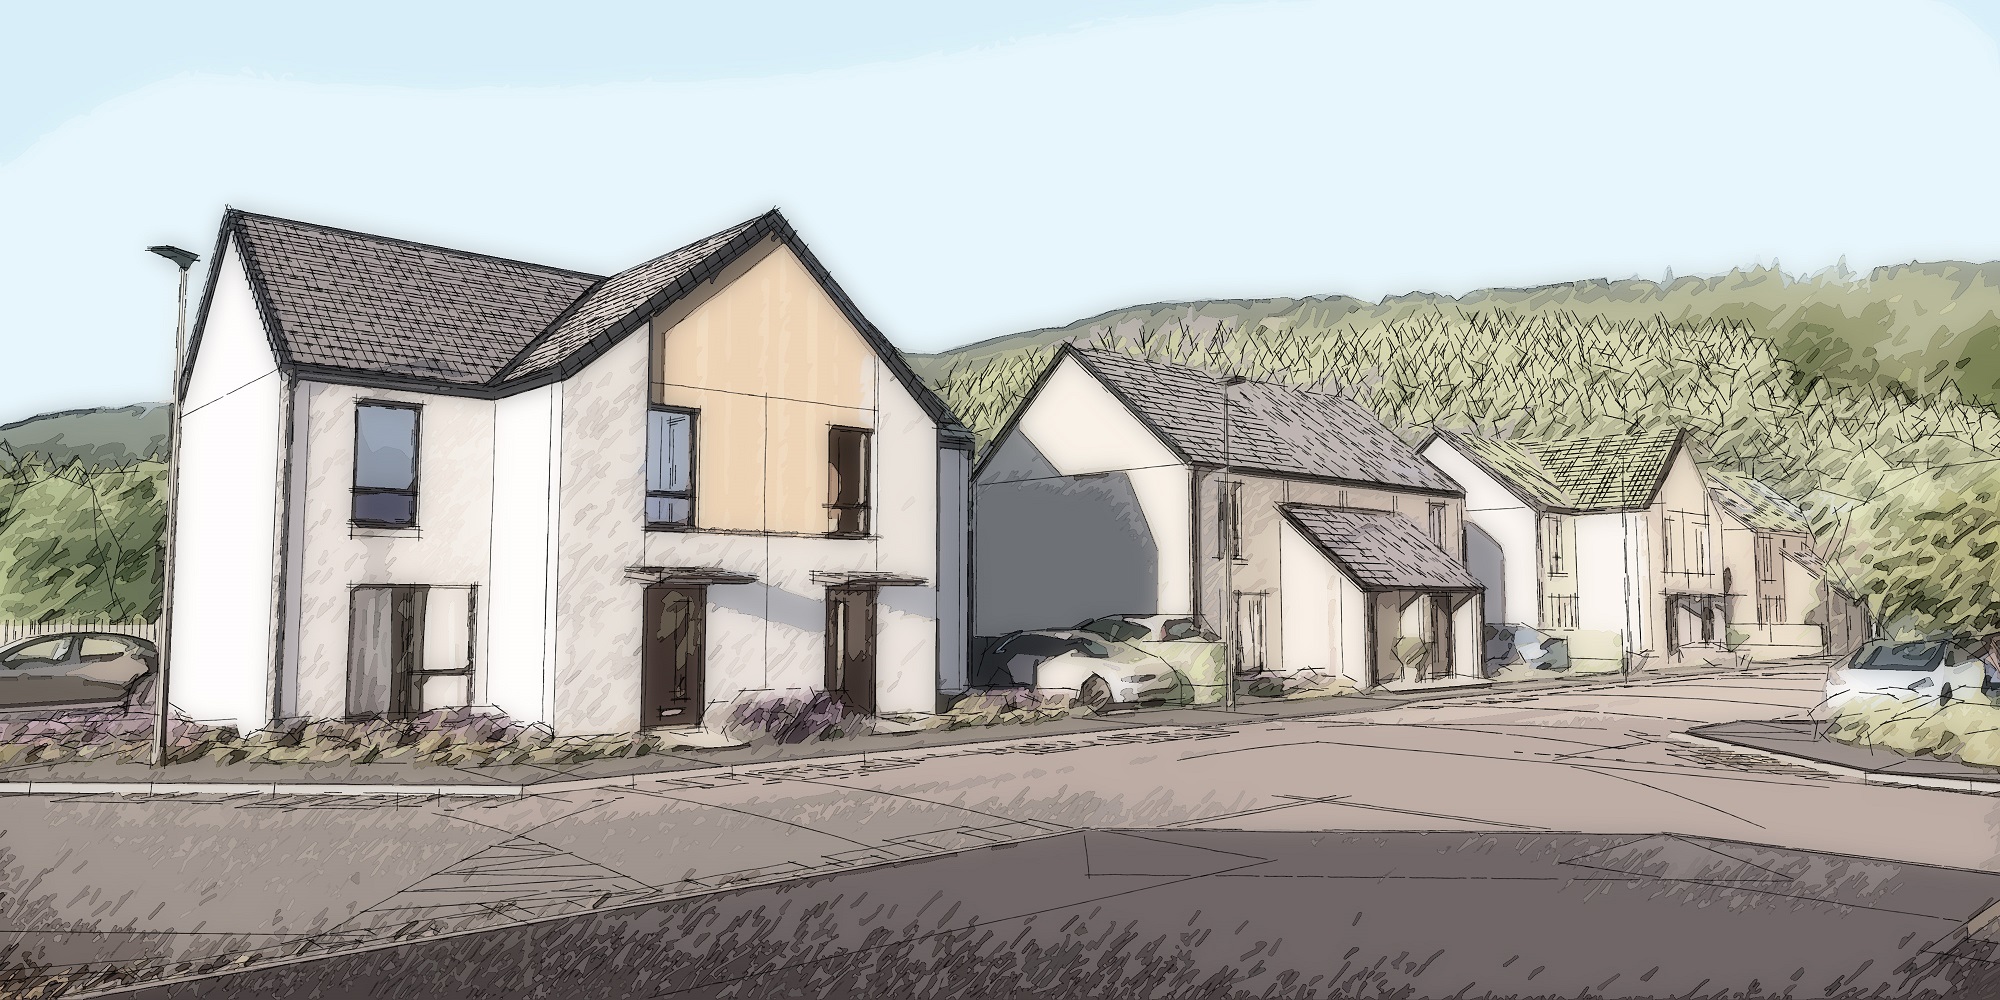 Eildon and Cruden to showcase updated proposals for former Jedburgh school site